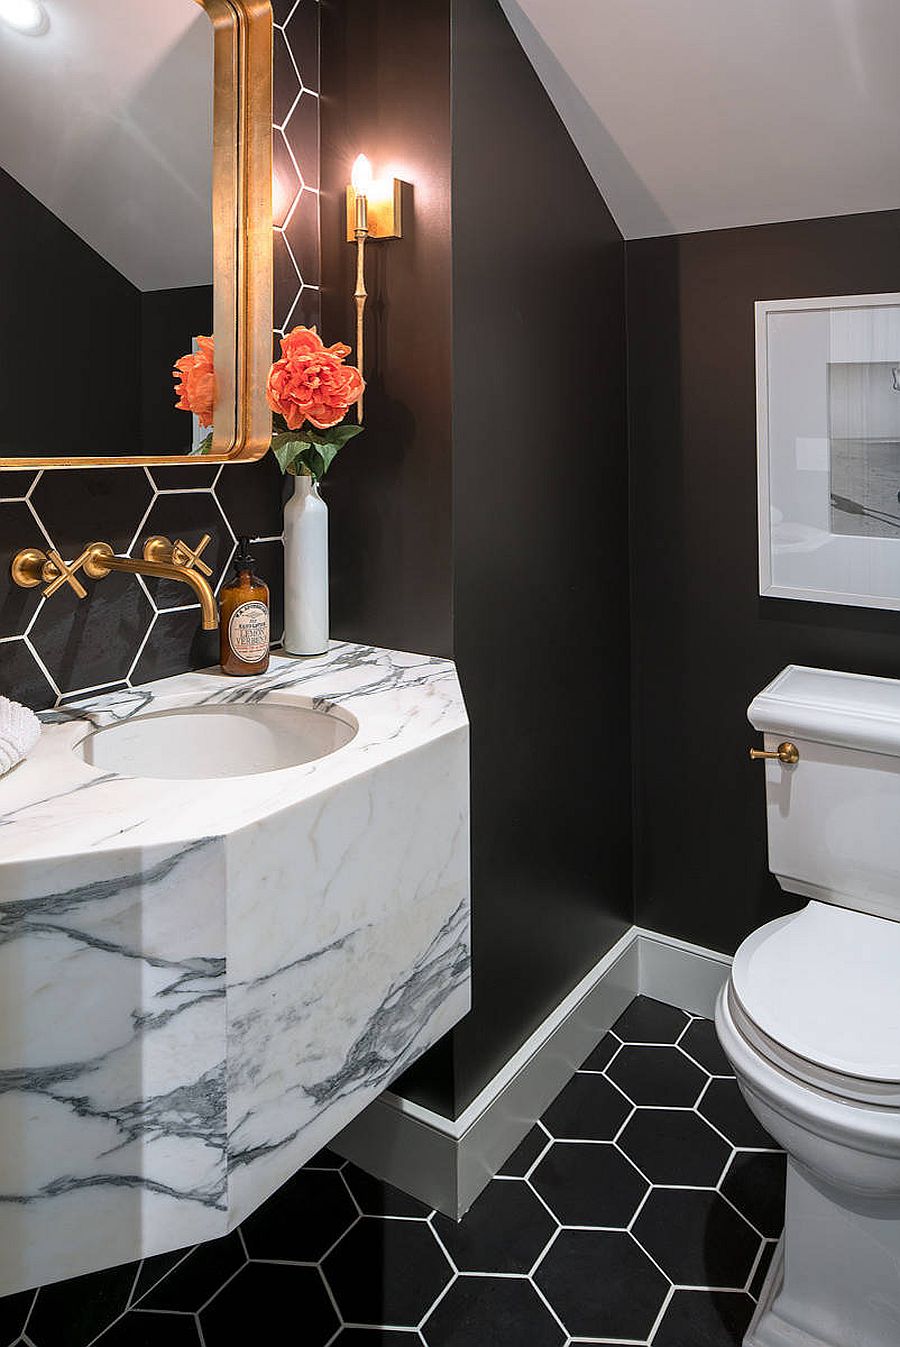 Fabulous-marble-vanity-for-the-chic-contemporary-bathroom-that-features-hexagonal-floor-tiles